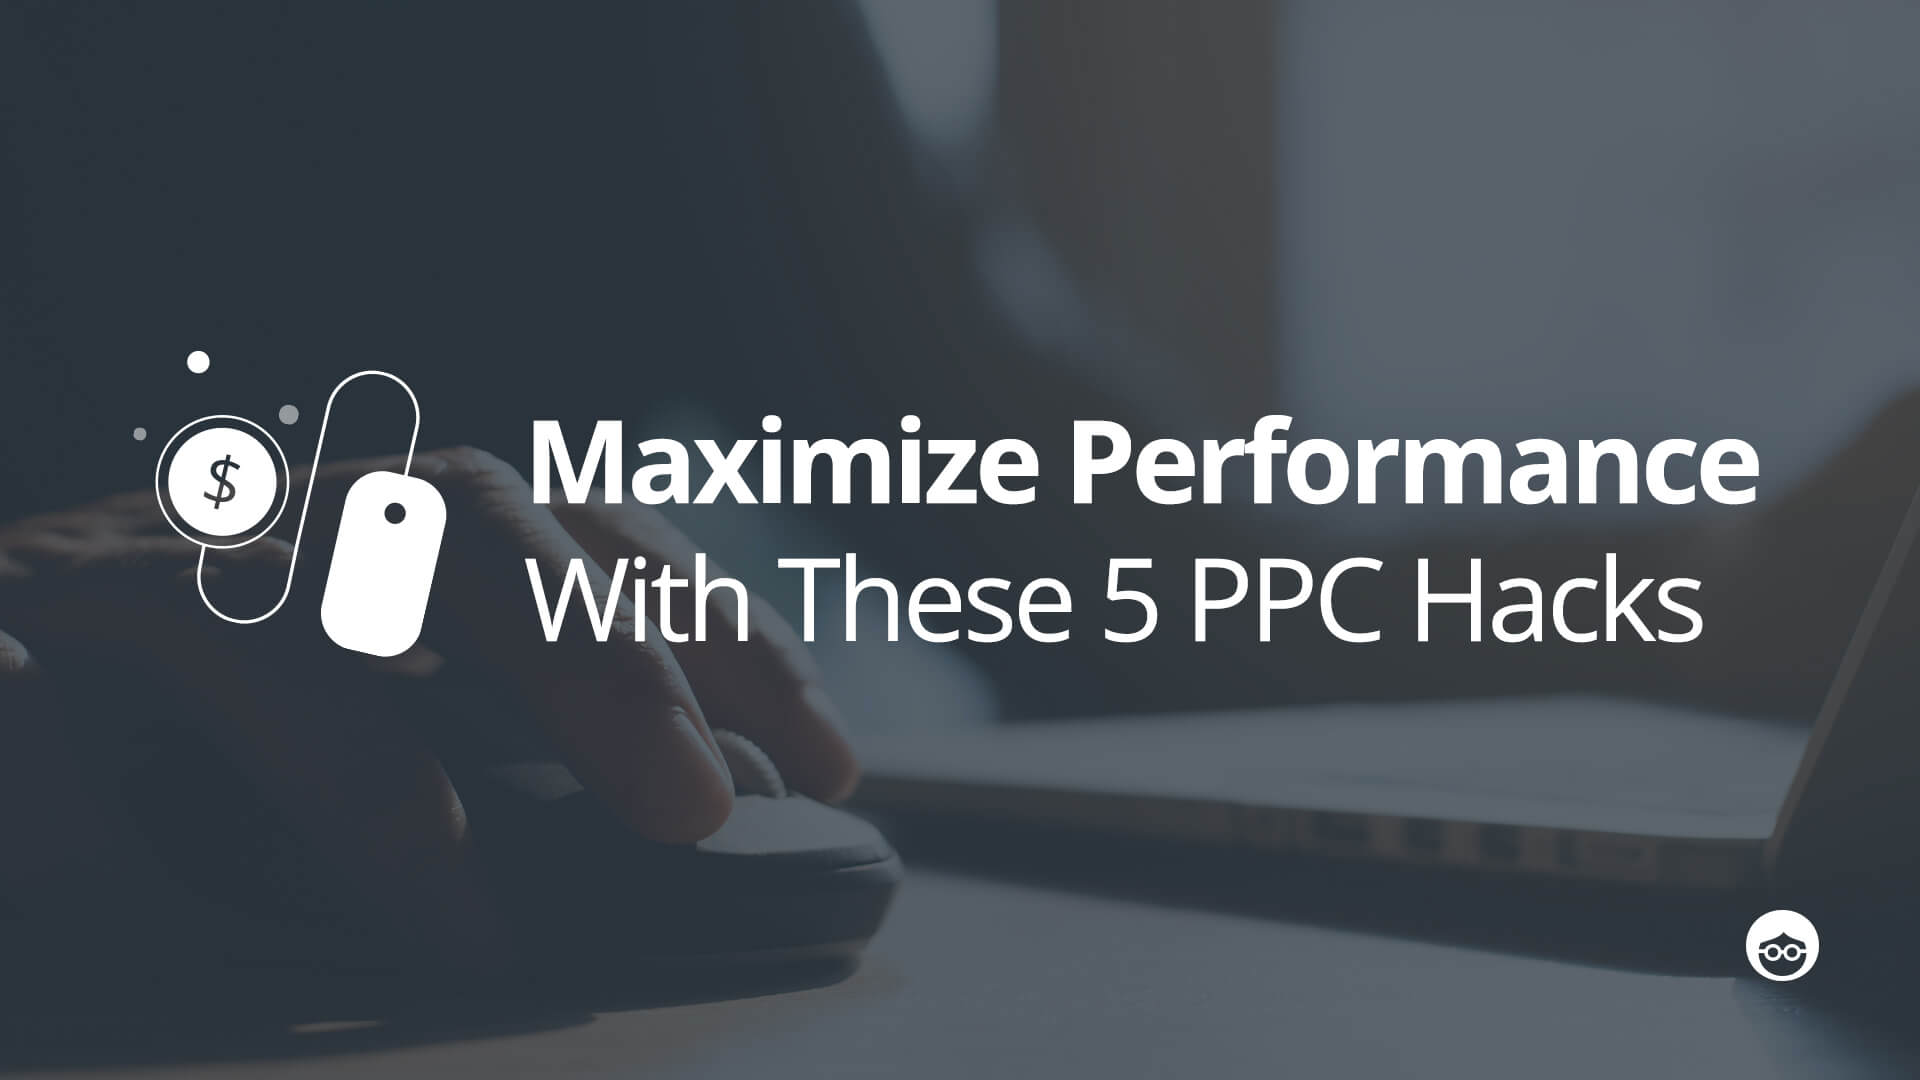 5 PPC Best Practices to Maximize Performance